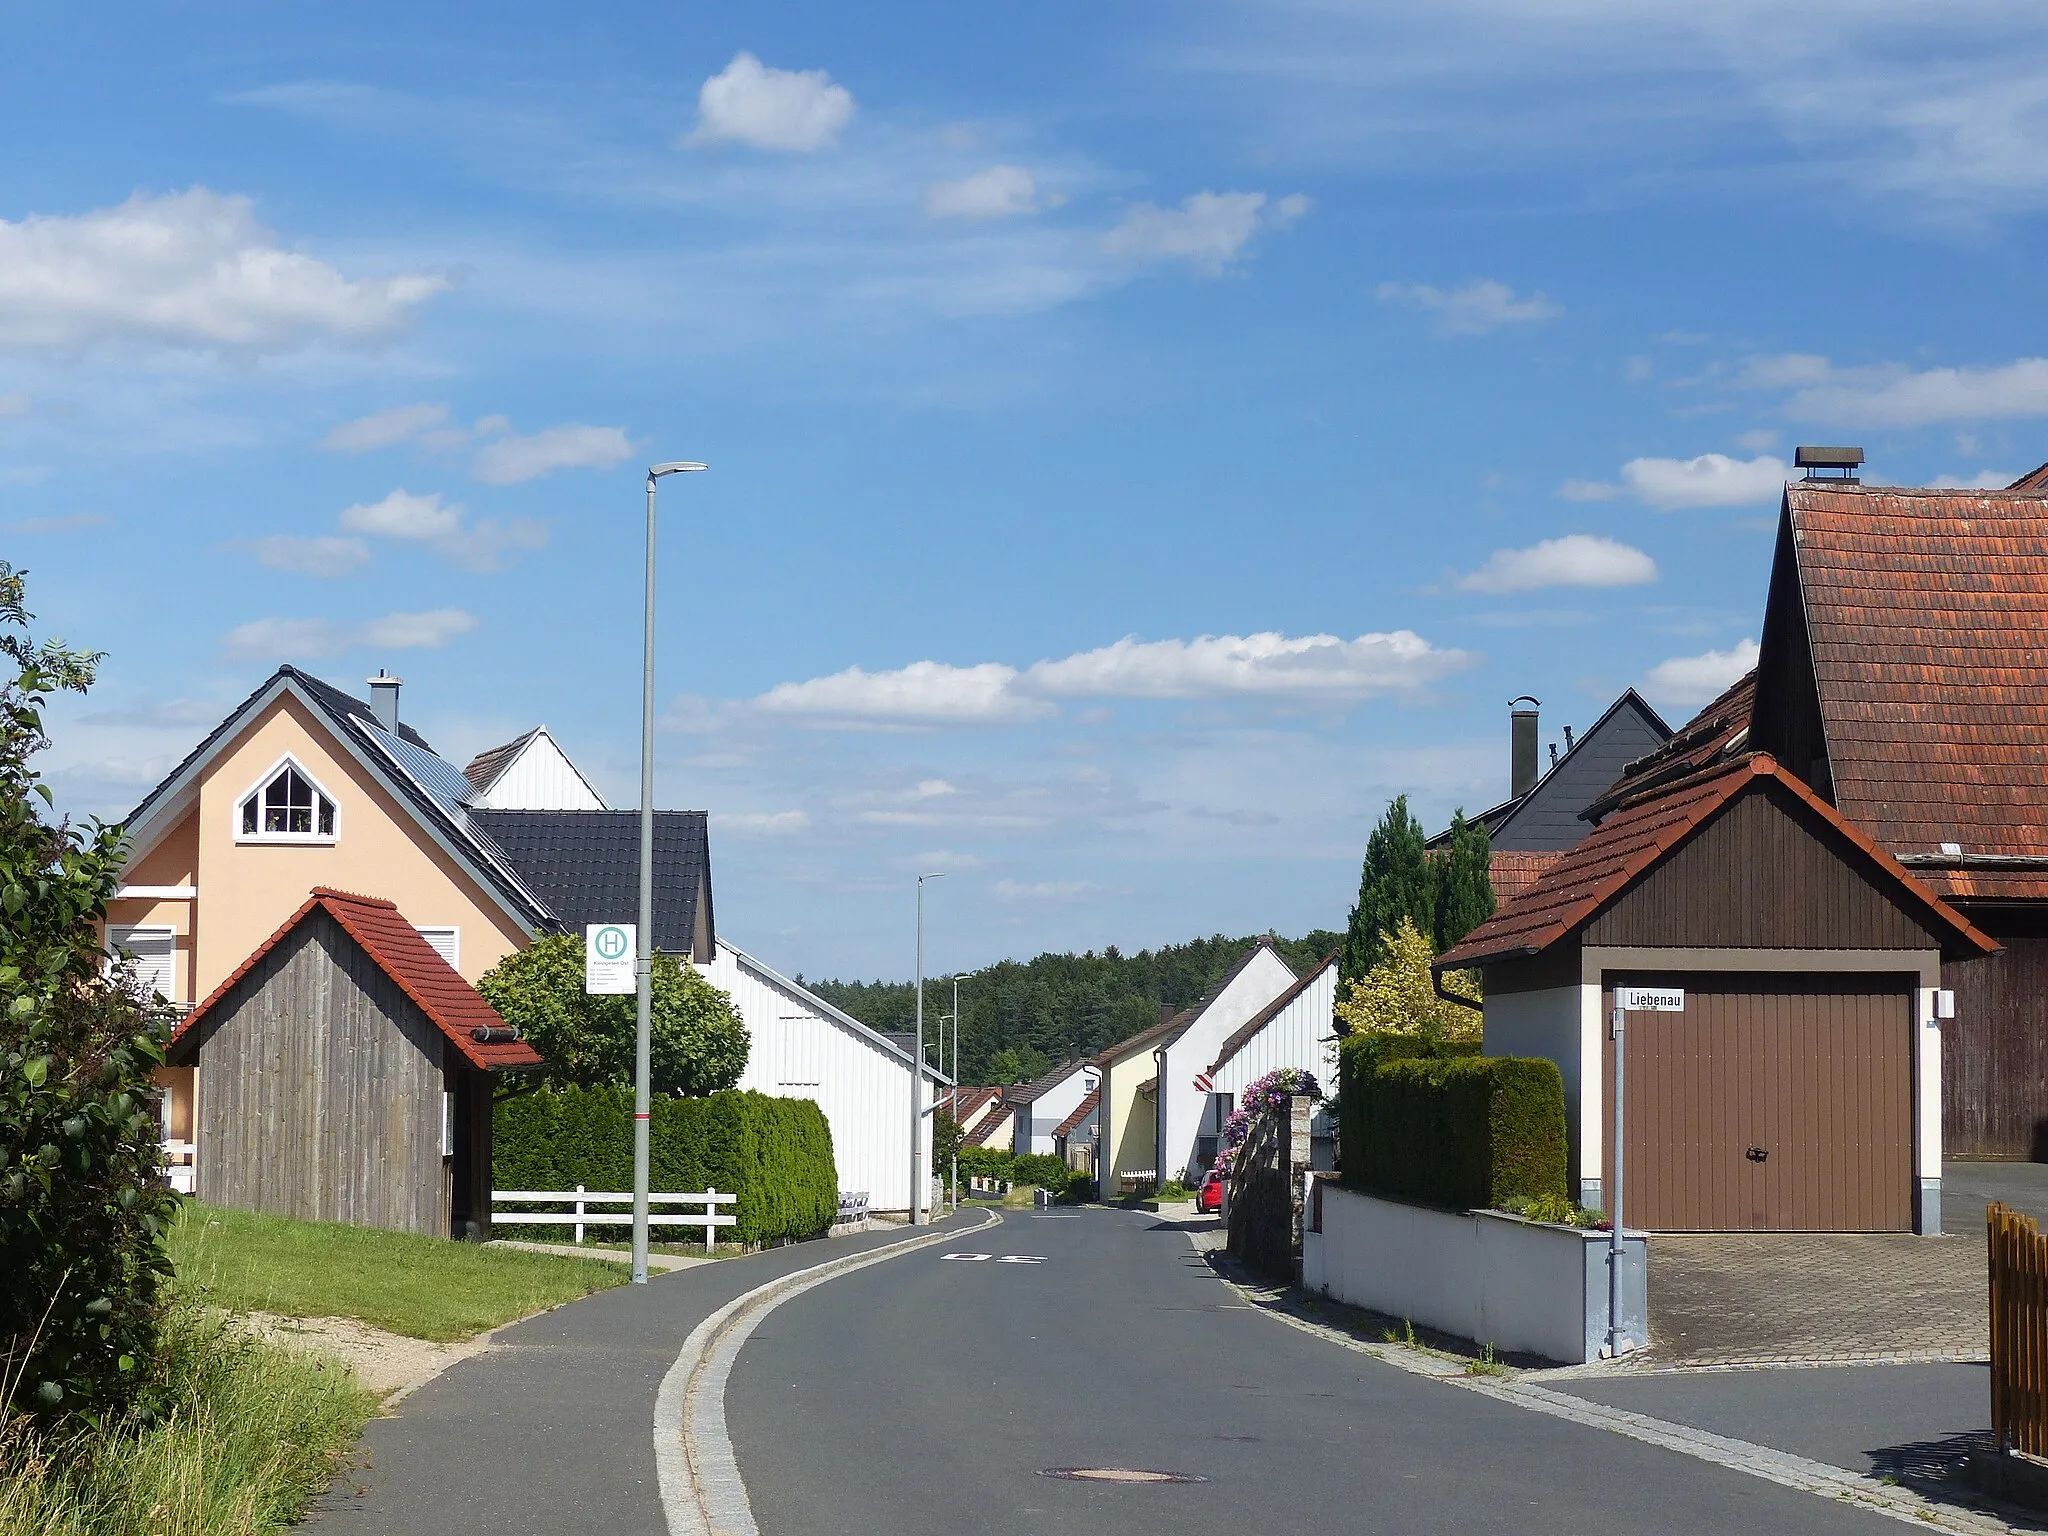 Photo showing: The hamlet Liebenau, a district of the municipality of Gößweinstein.